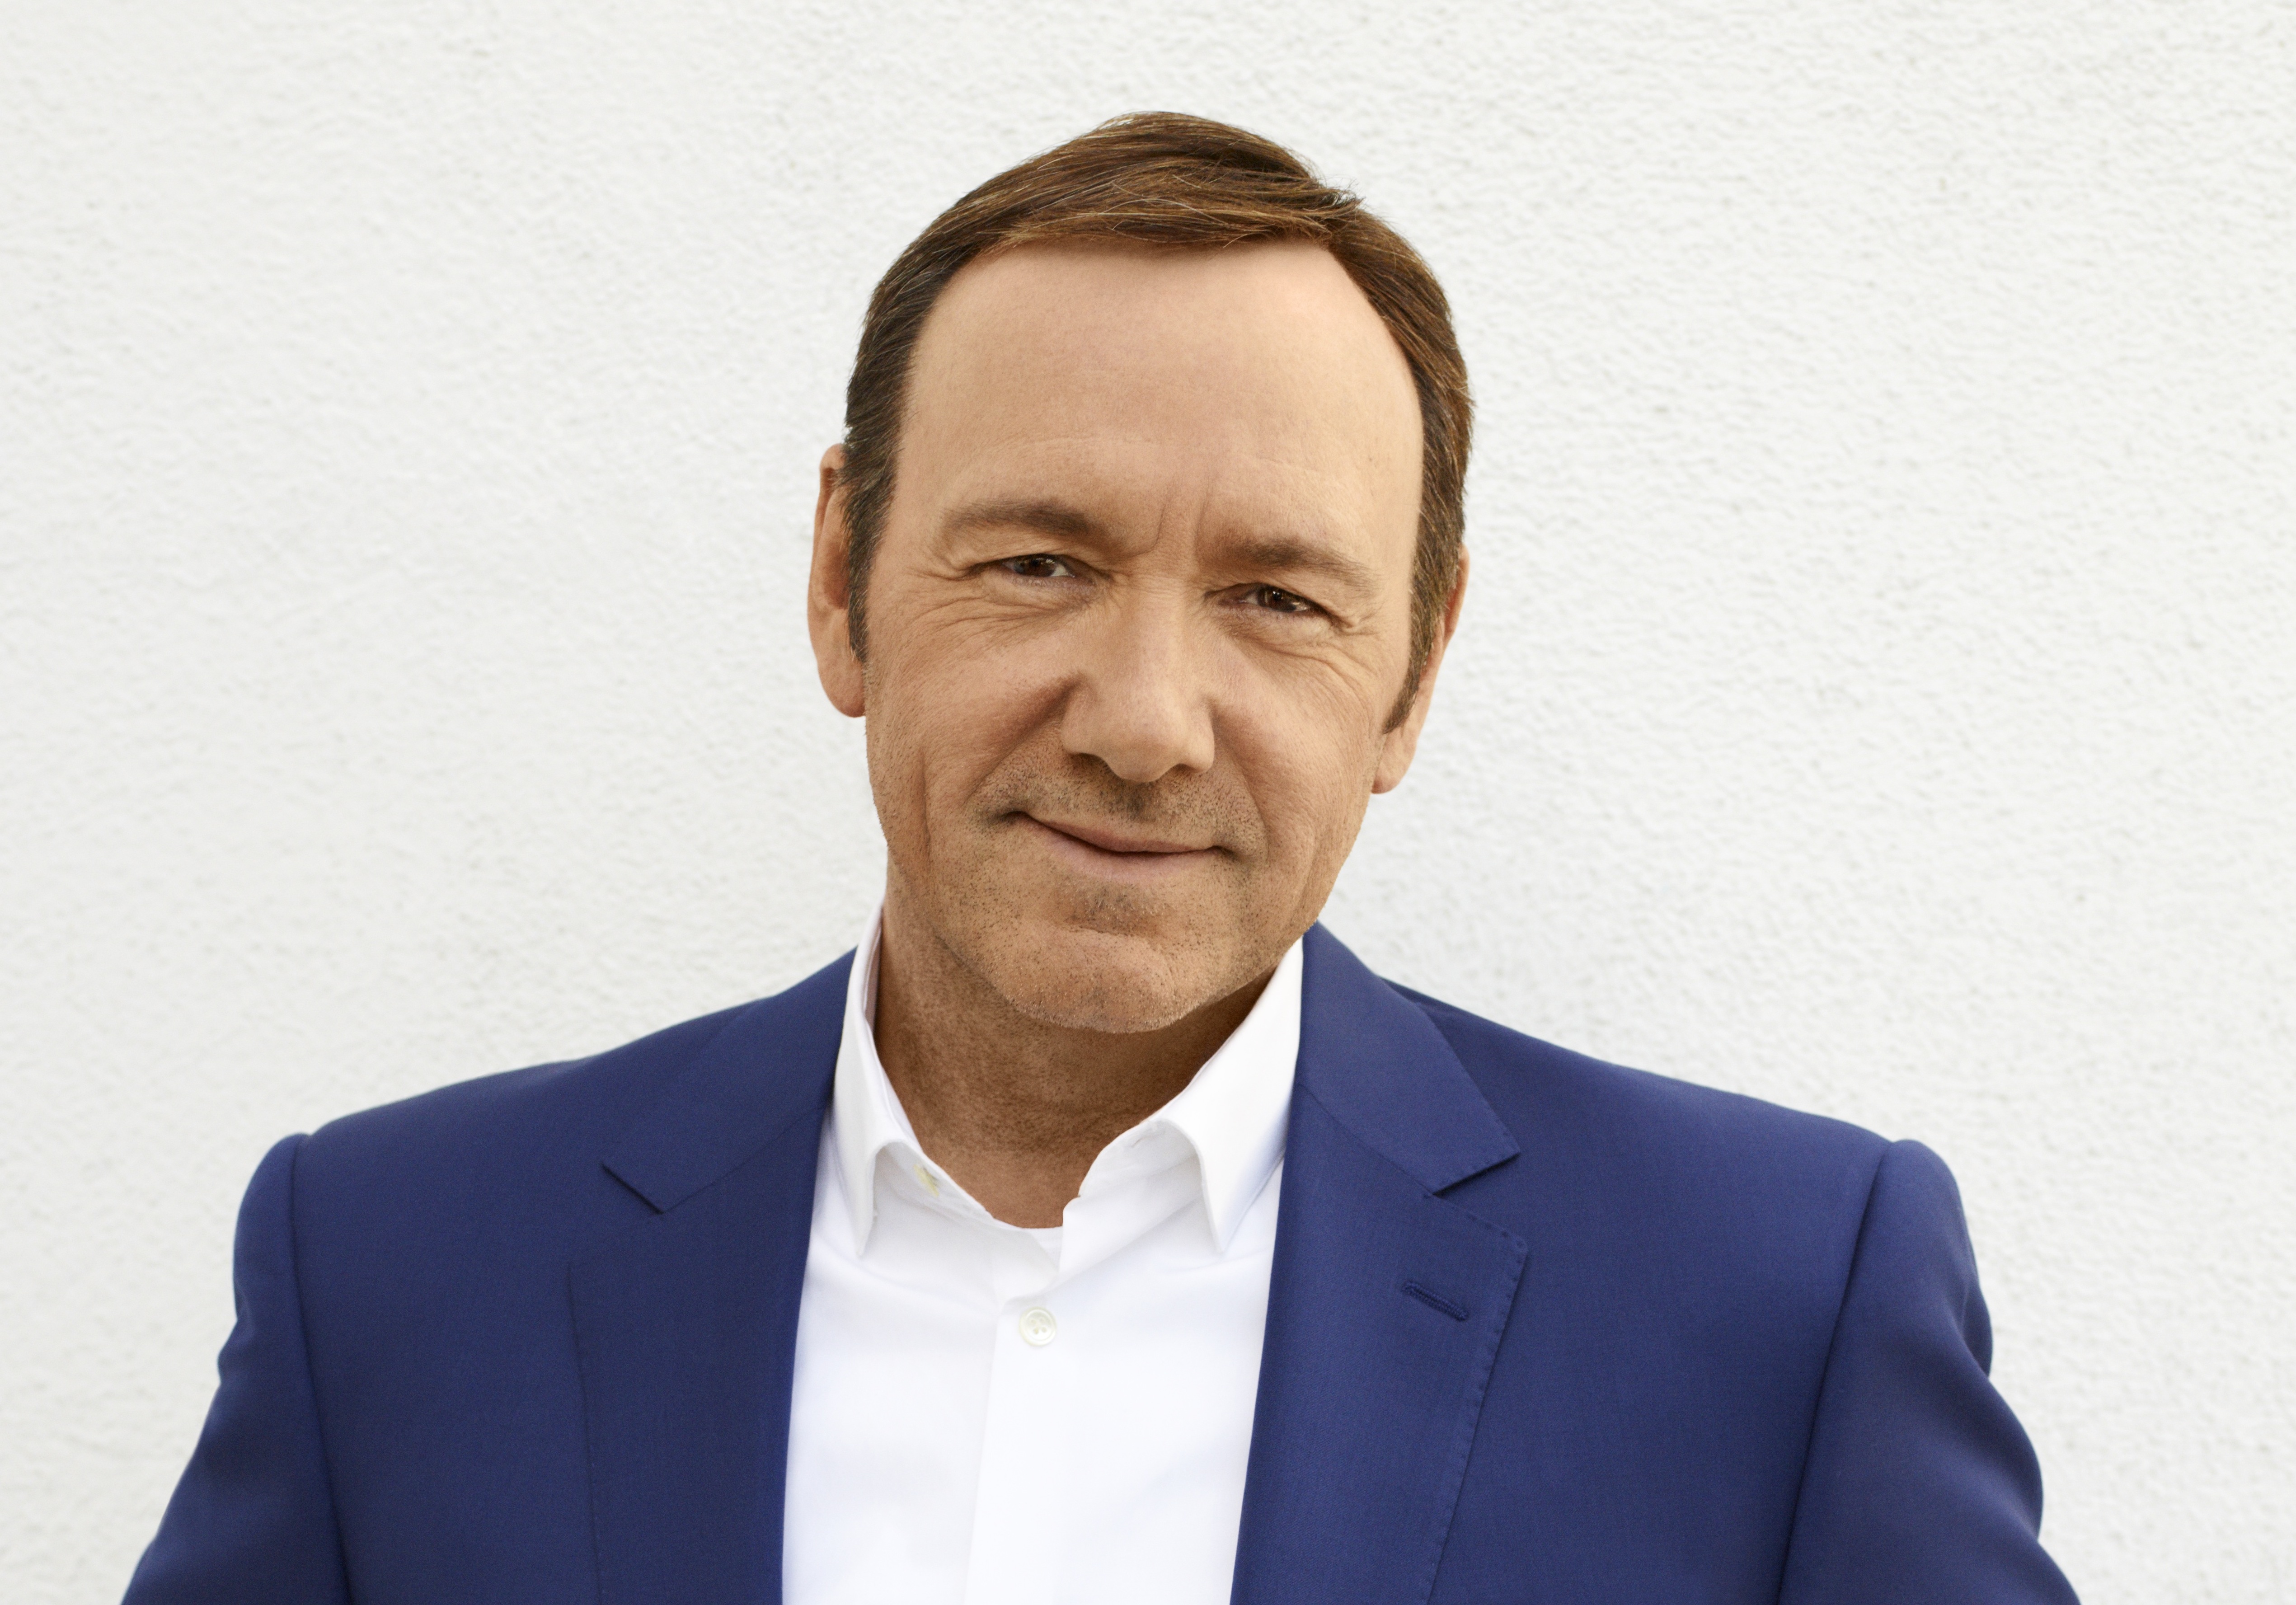 kevin-spacey-images